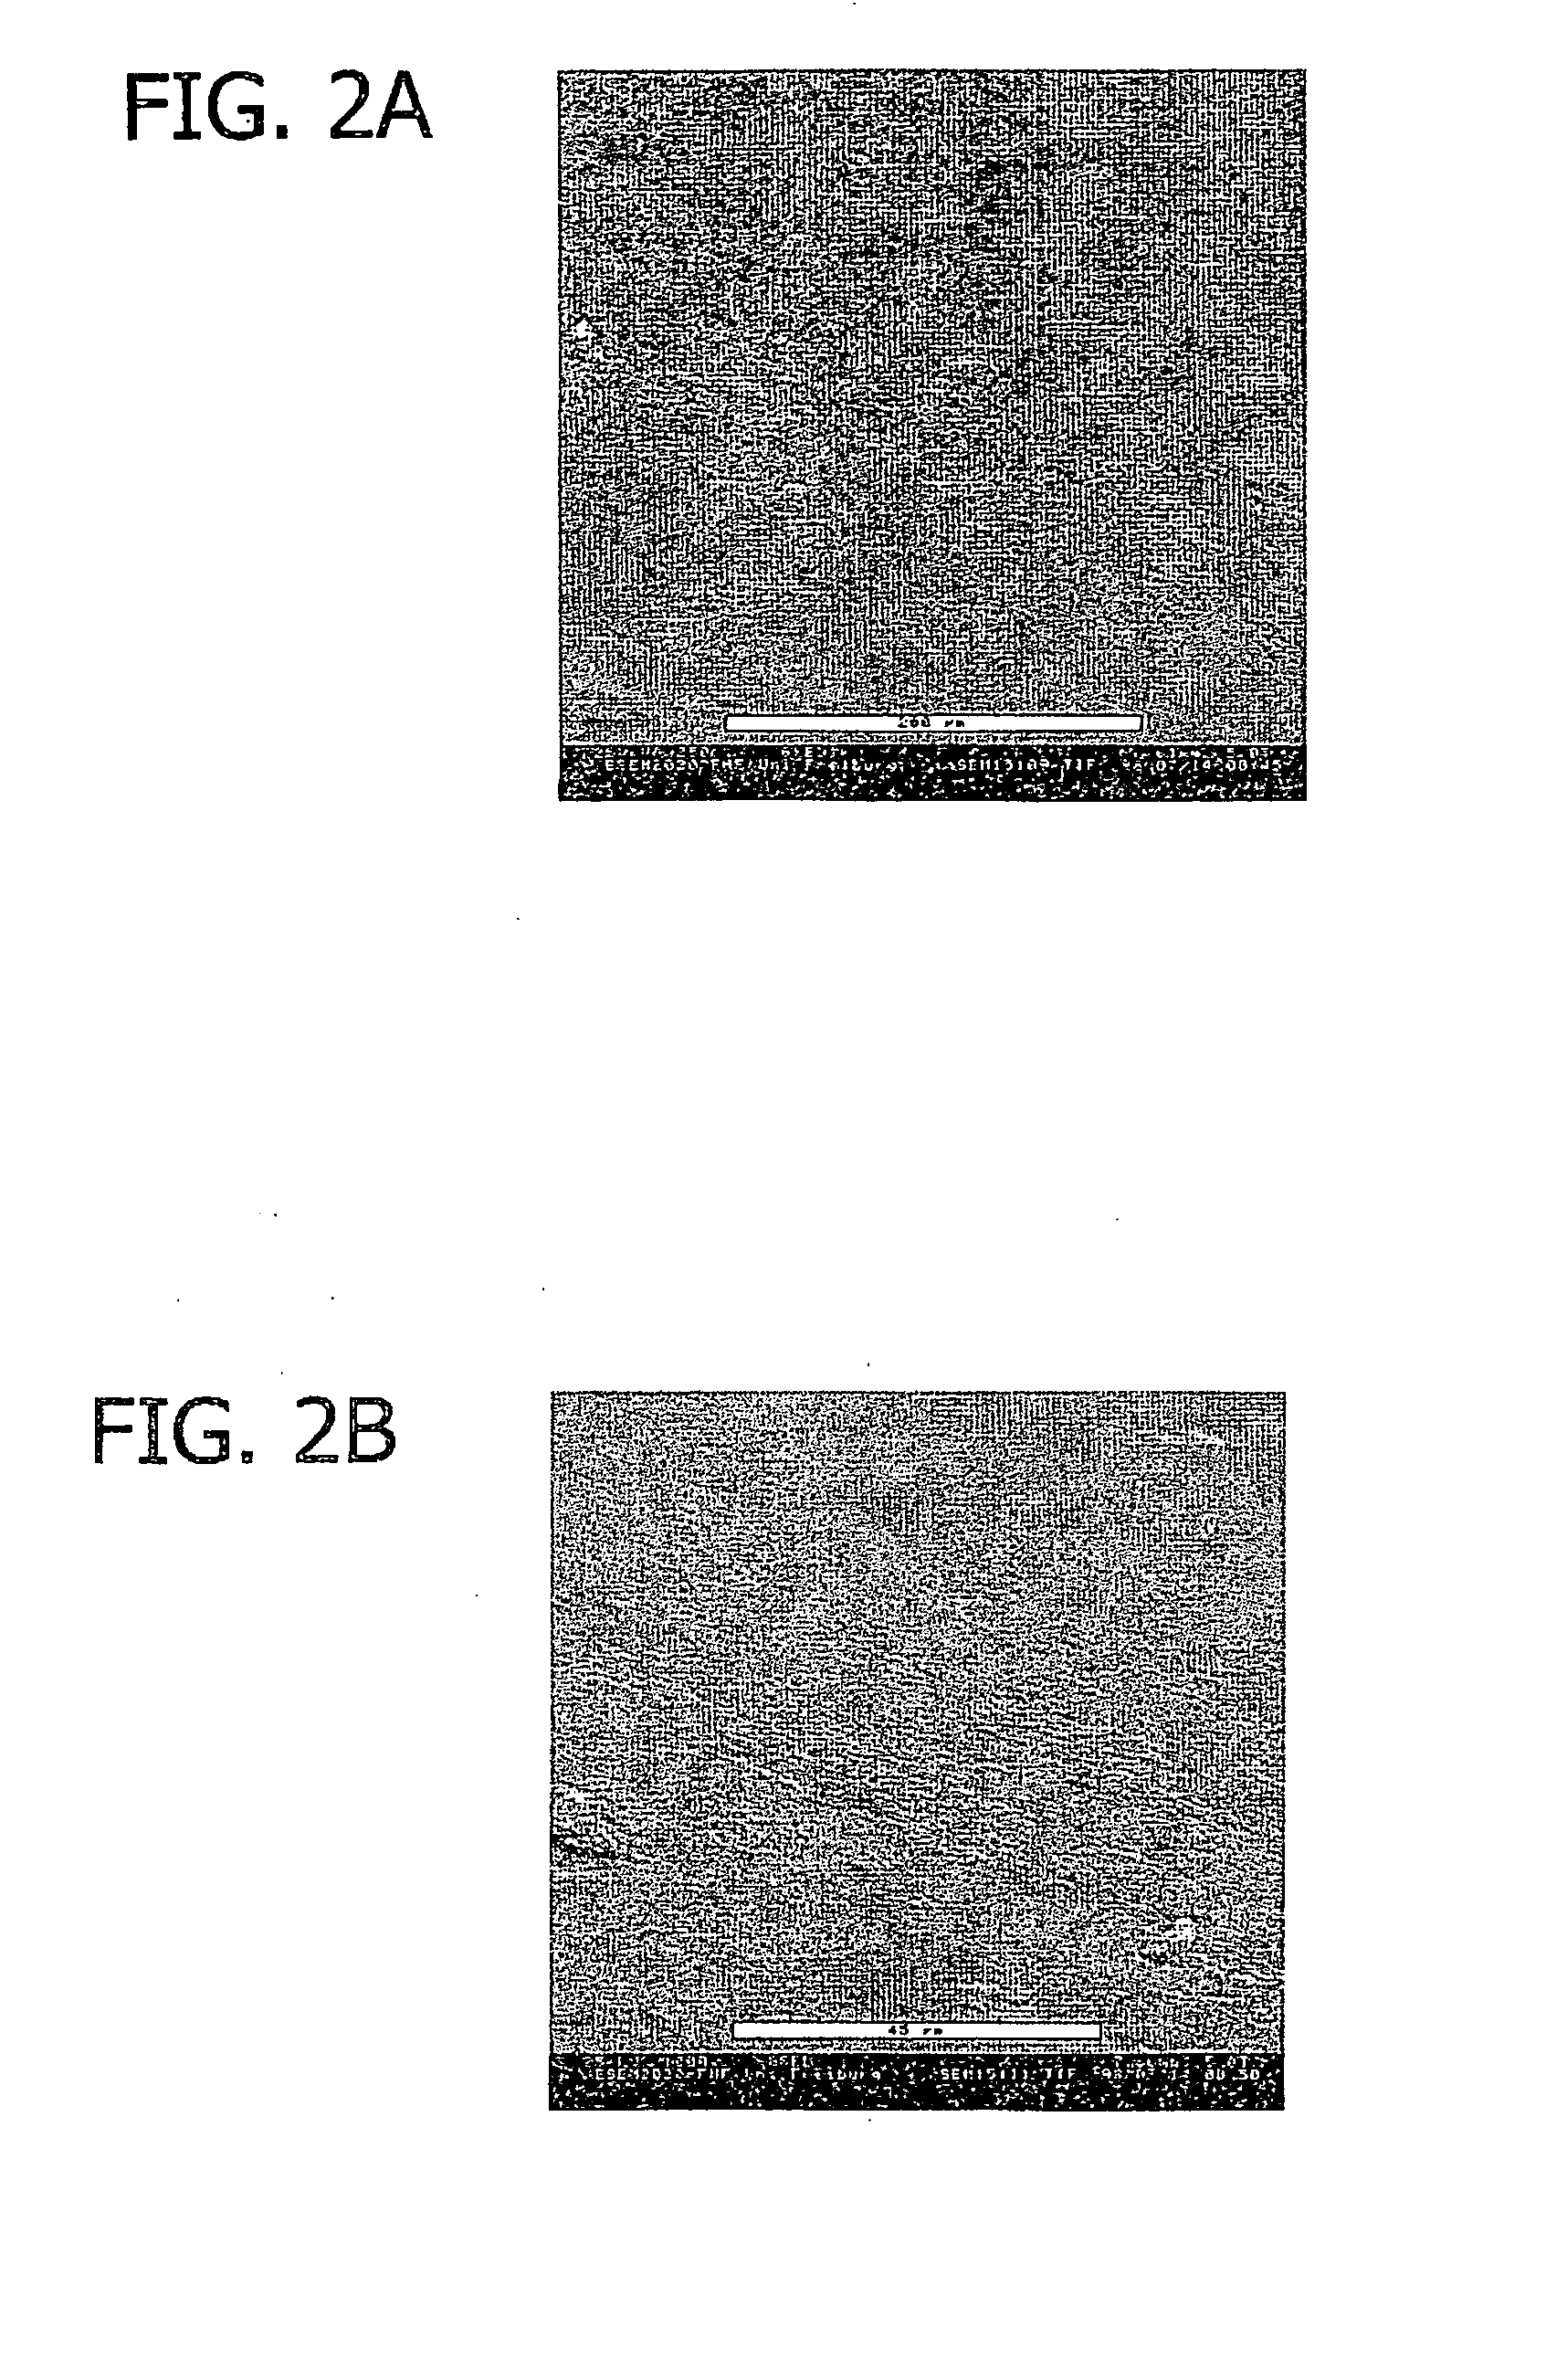 Method for directed cell in-growth and controlled tissue regeneration in spinal surgery